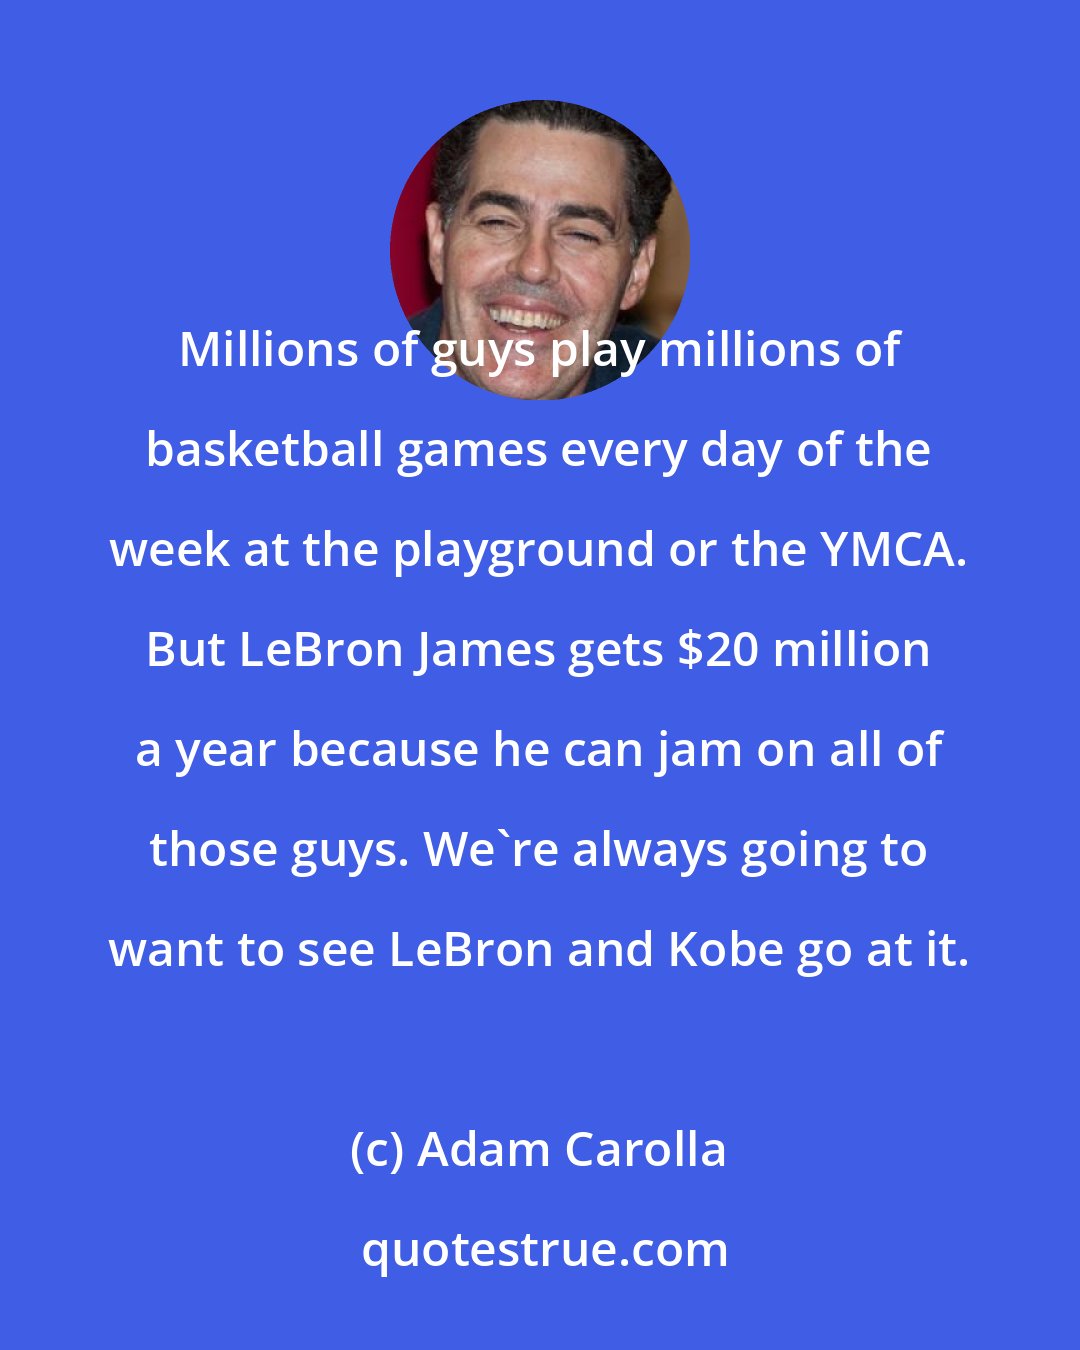 Adam Carolla: Millions of guys play millions of basketball games every day of the week at the playground or the YMCA. But LeBron James gets $20 million a year because he can jam on all of those guys. We're always going to want to see LeBron and Kobe go at it.